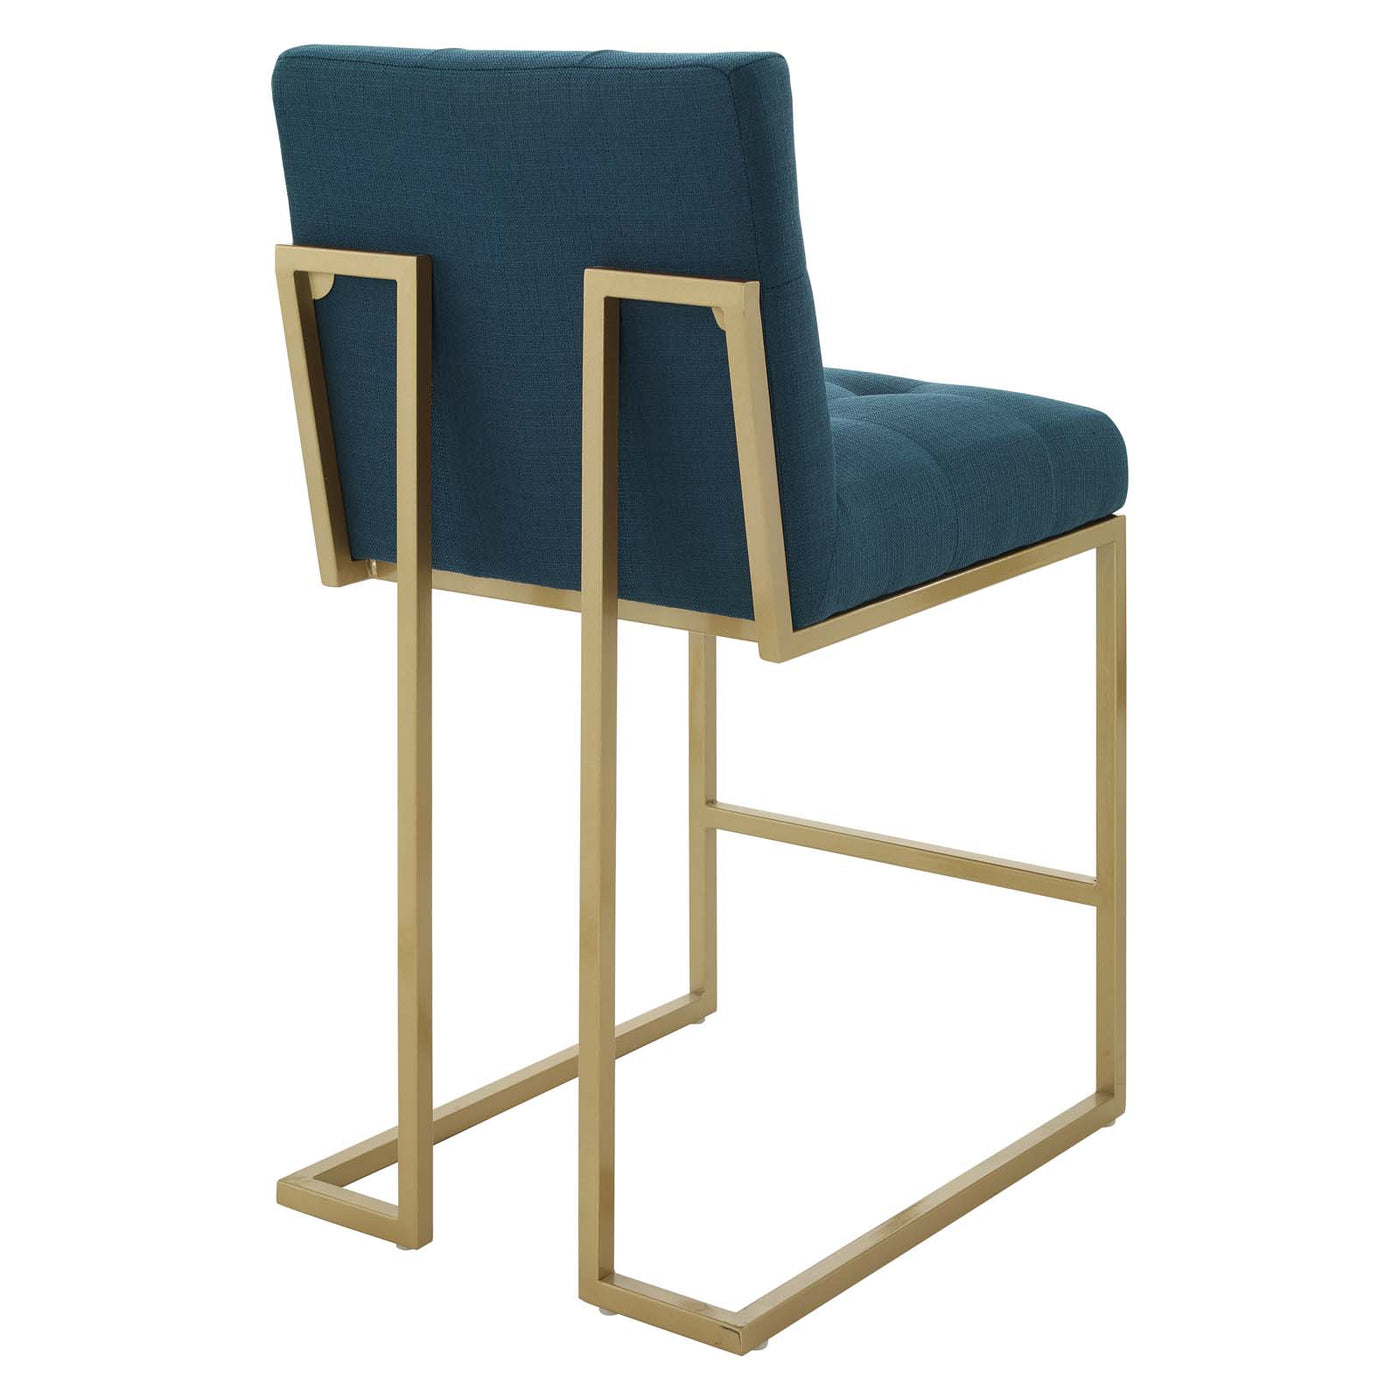 Privy Gold Stainless Steel Upholstered Fabric Counter Stool